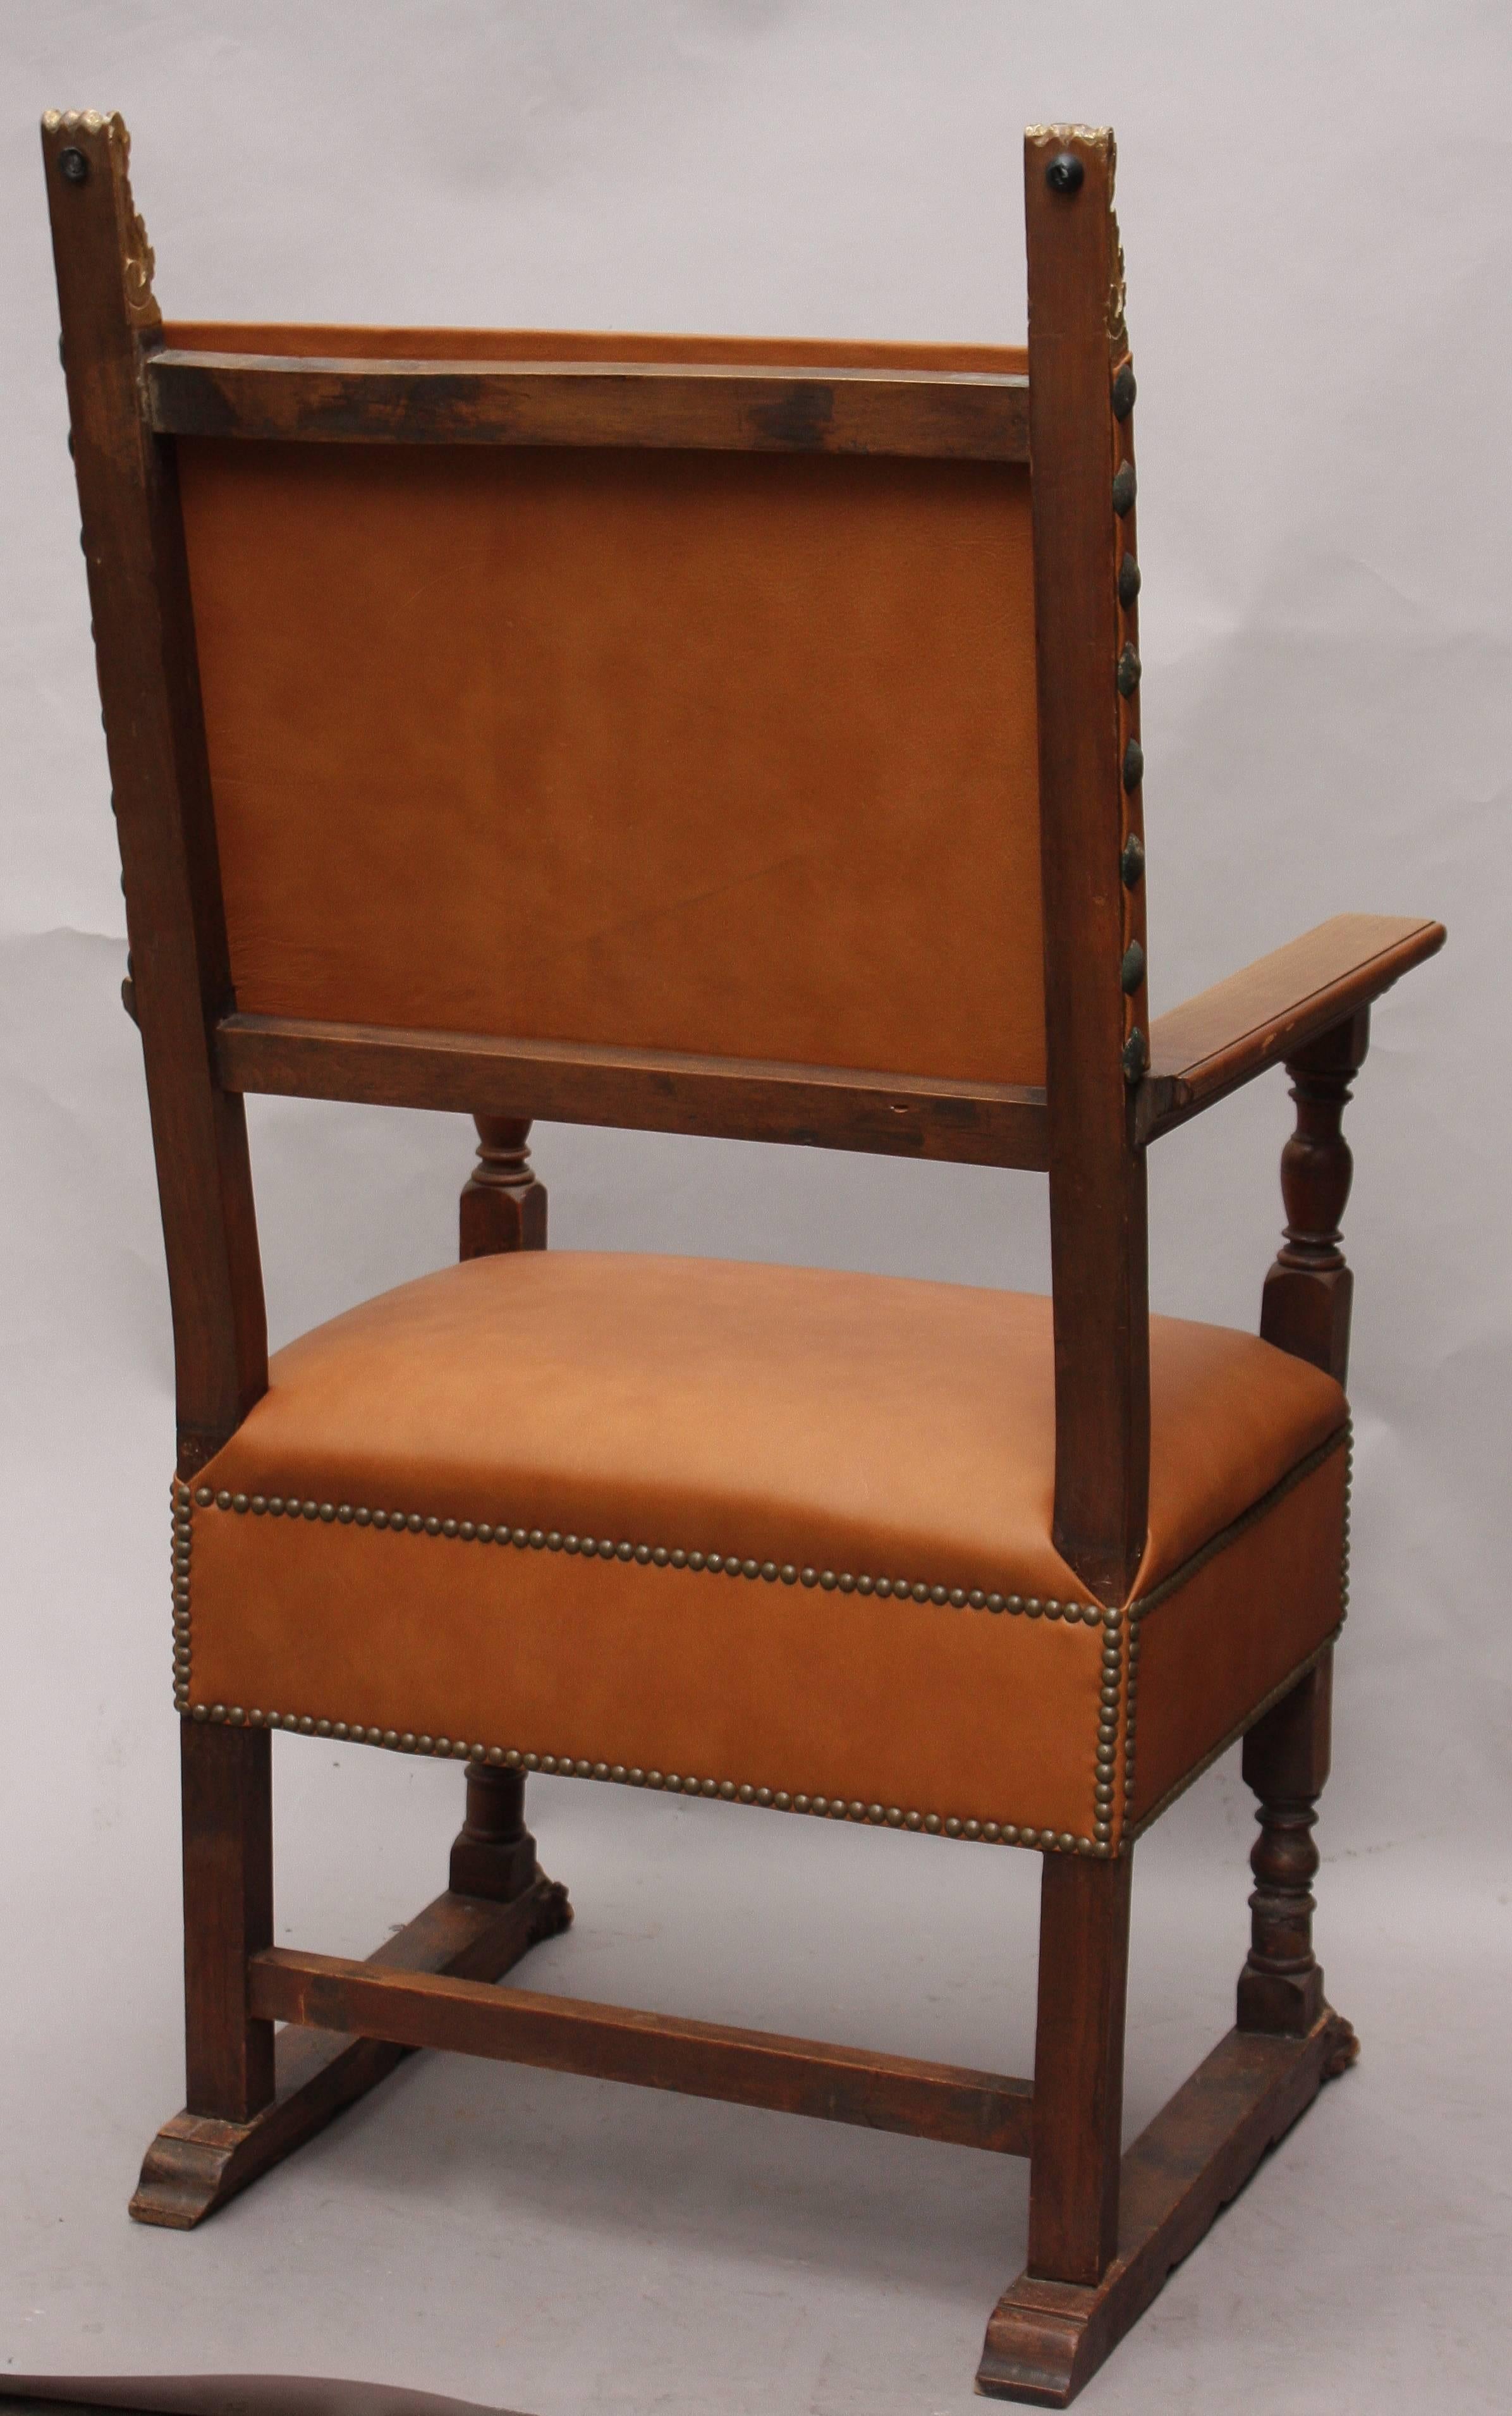 Beautifully carved Spanish Revival chair with new leather upholstery, circa 1920s. Measures: 49.5